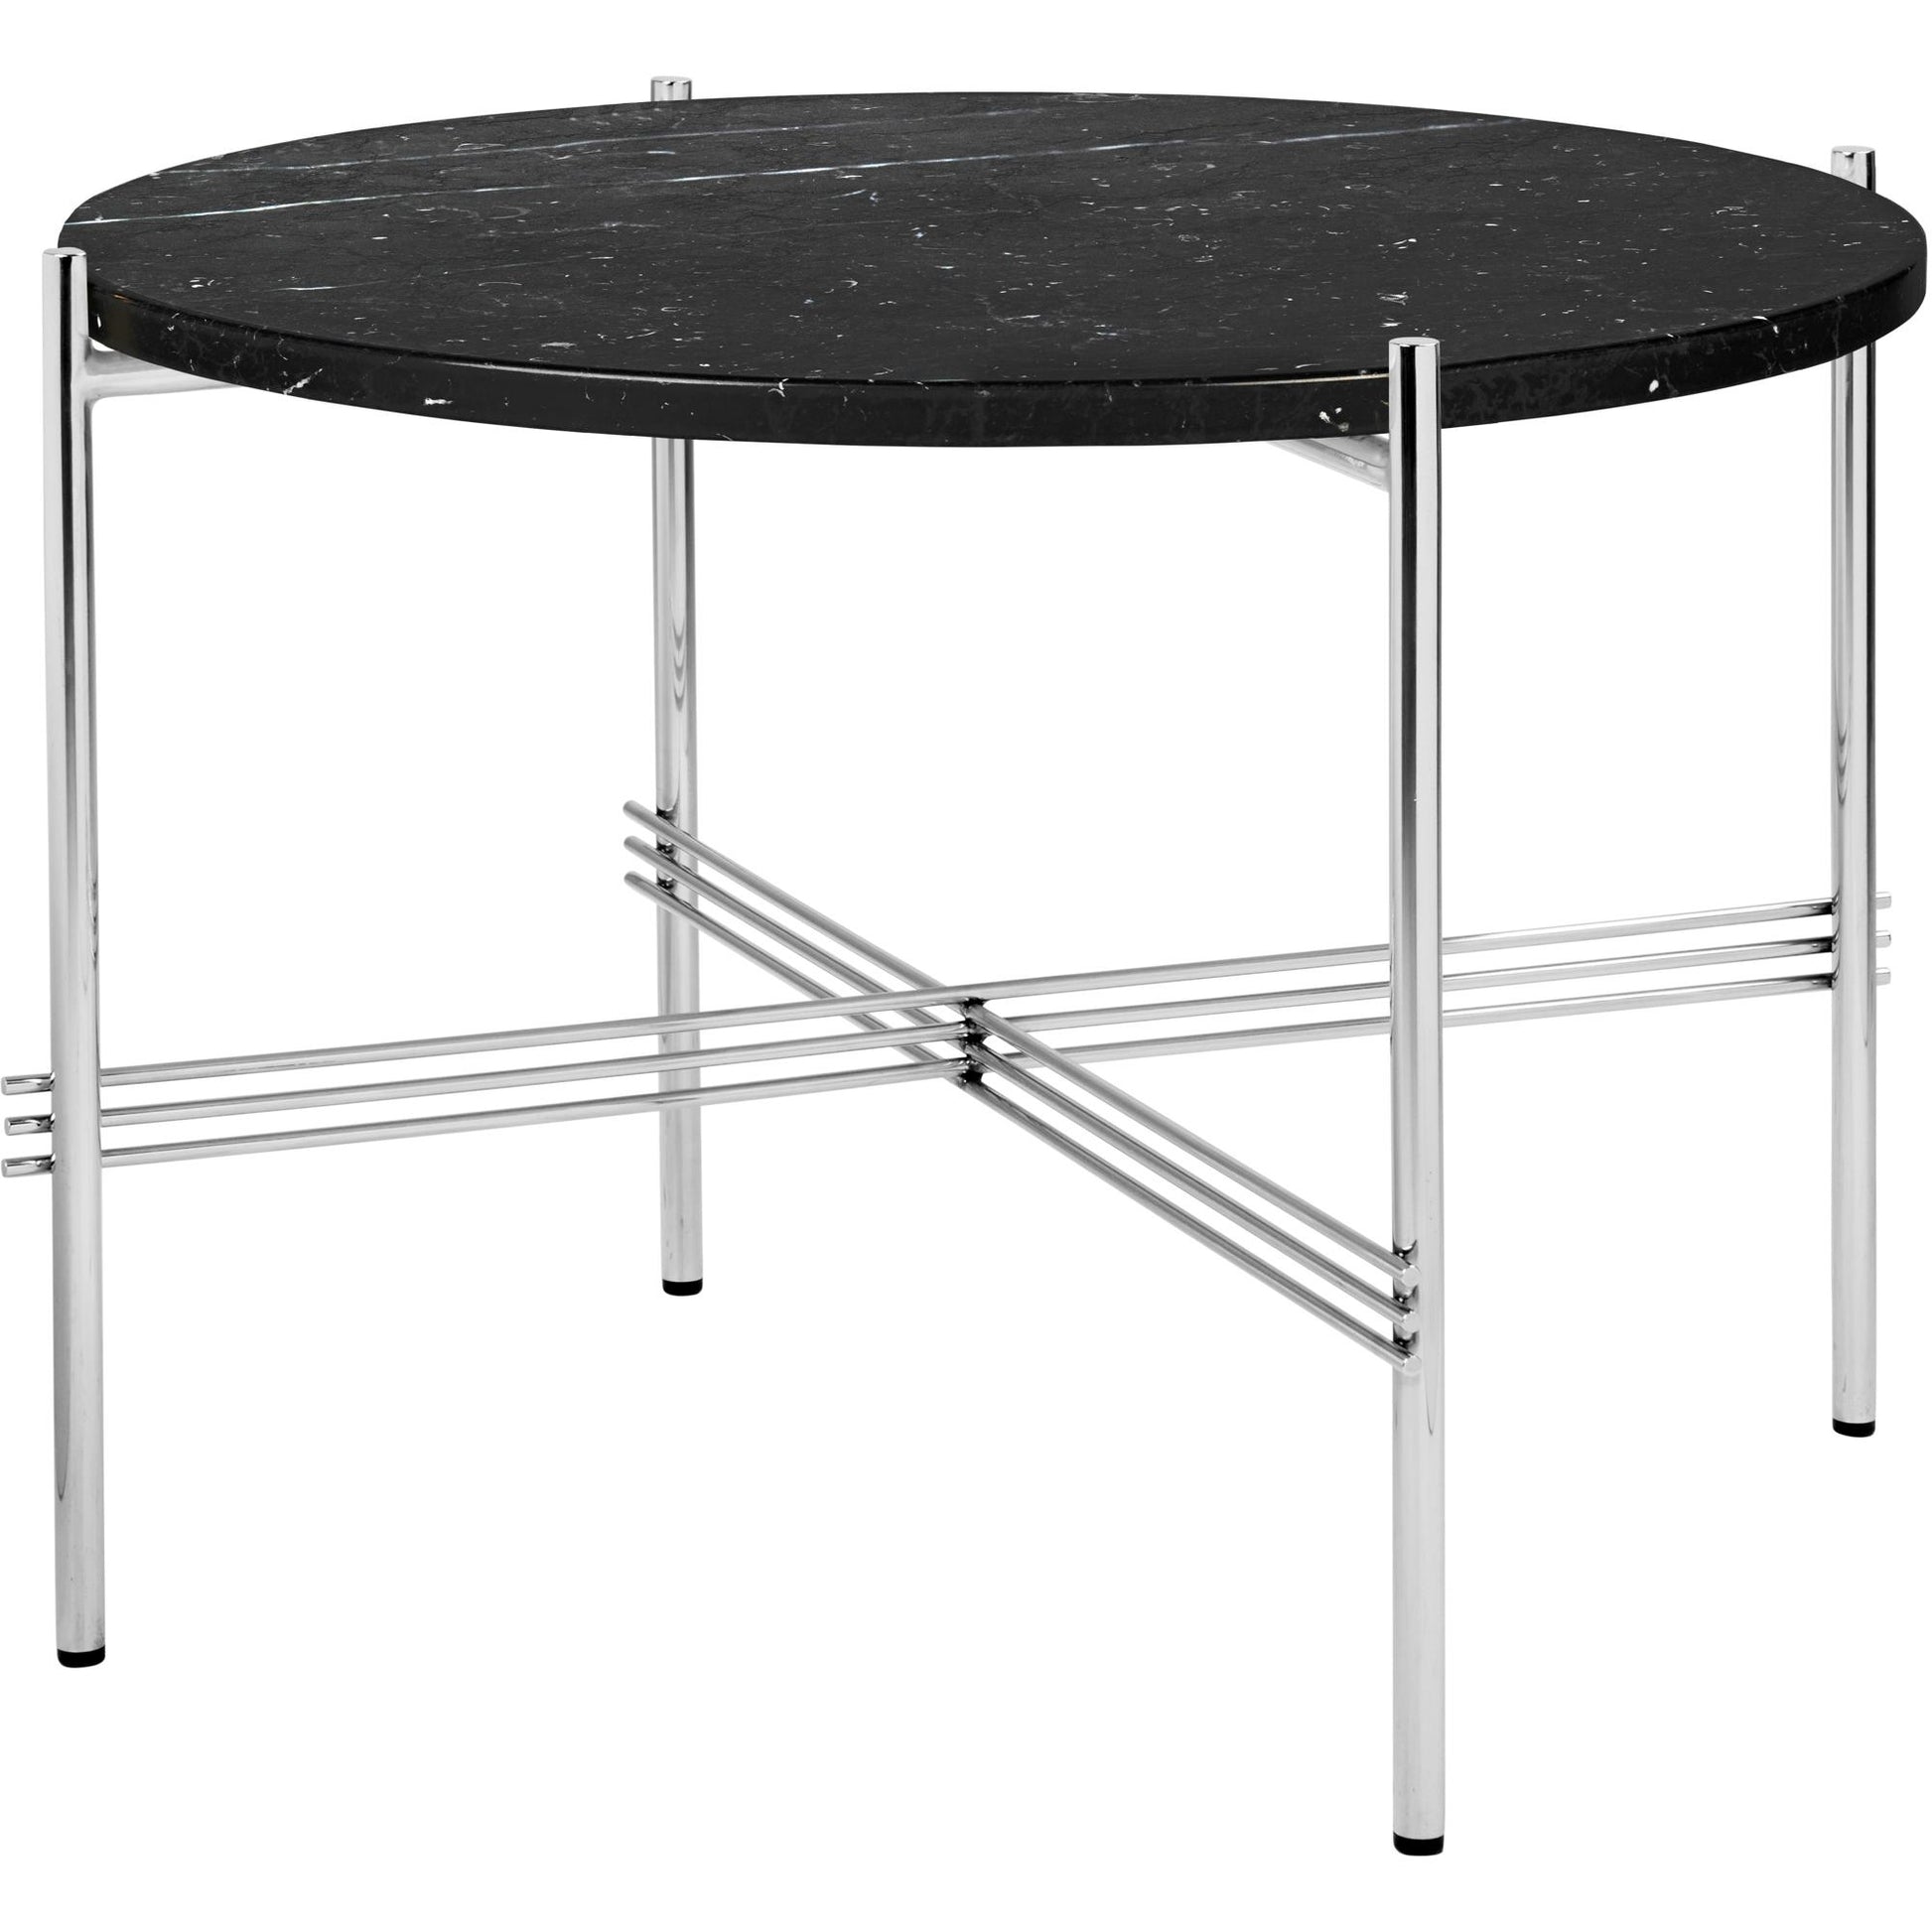 TS Coffee Table Round Ø55 by GUBI #Polished Steel/Black Marquina Marble